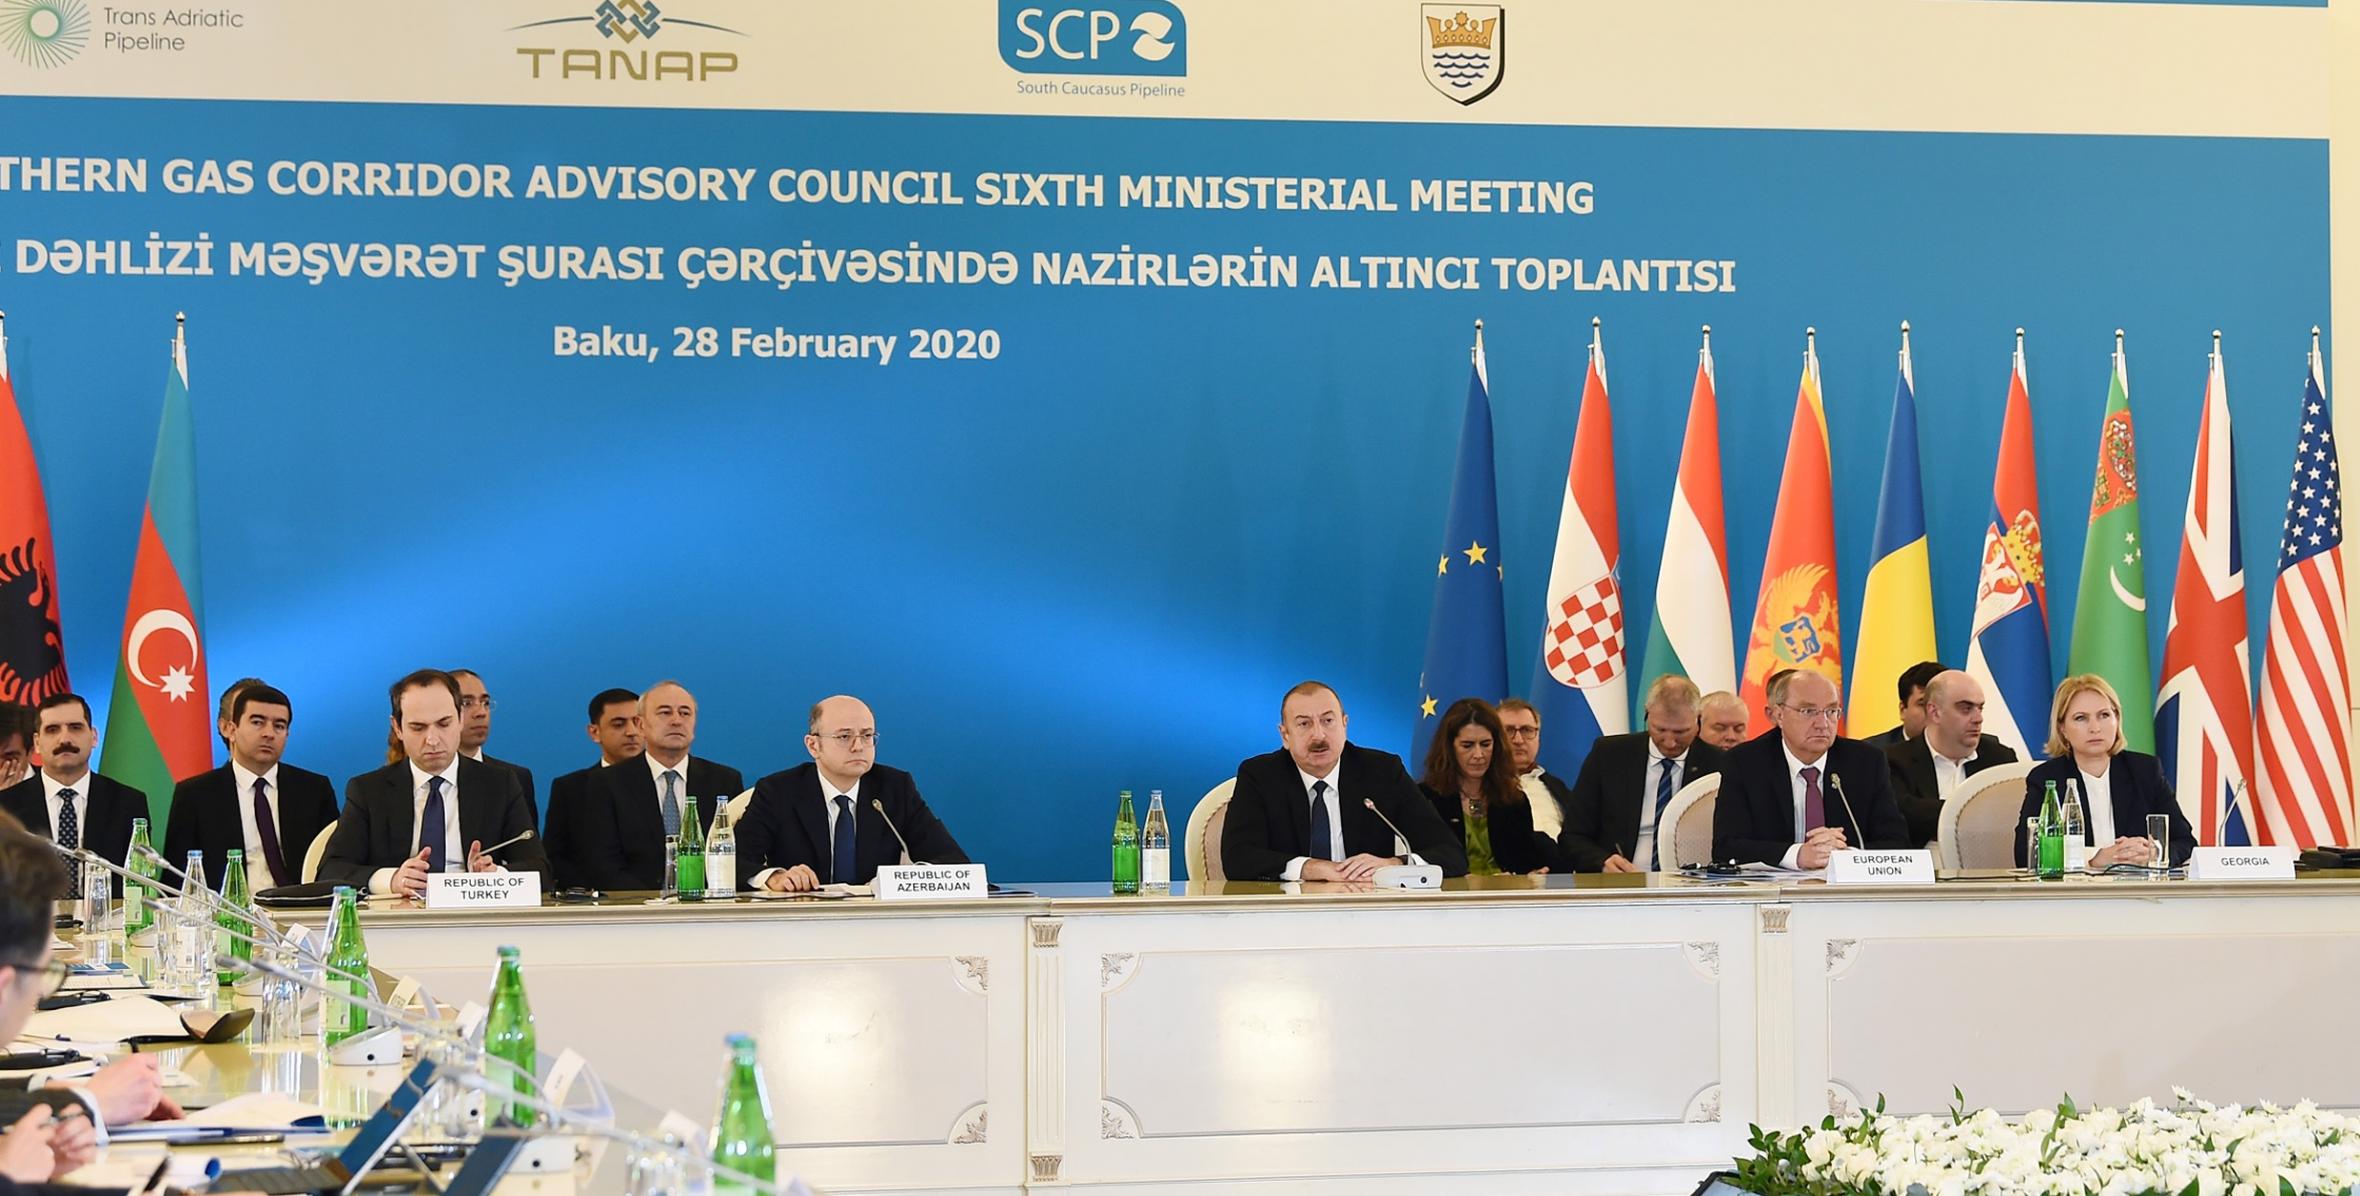 Sixth Ministerial Meeting of Southern Gas Corridor Advisory Council held in Baku